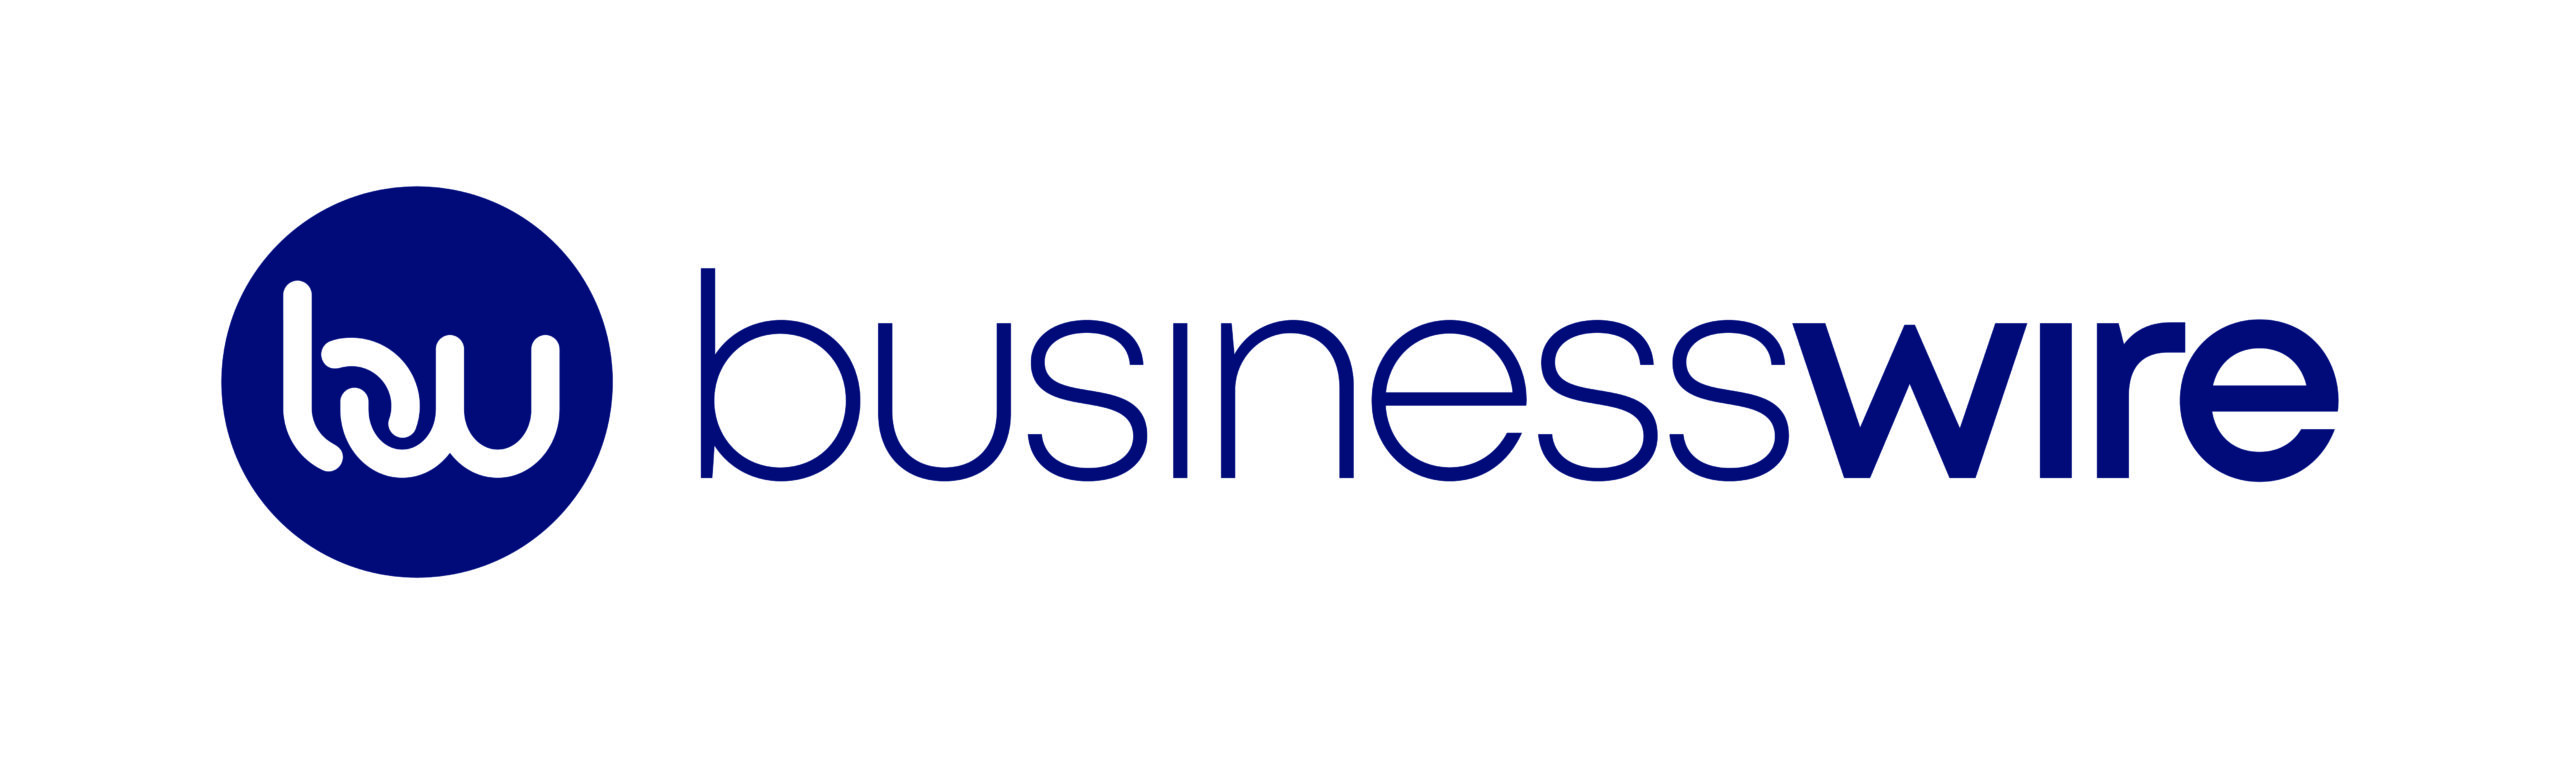 NEW Business Wire 2020 Logo Simple - Navy (1)-1